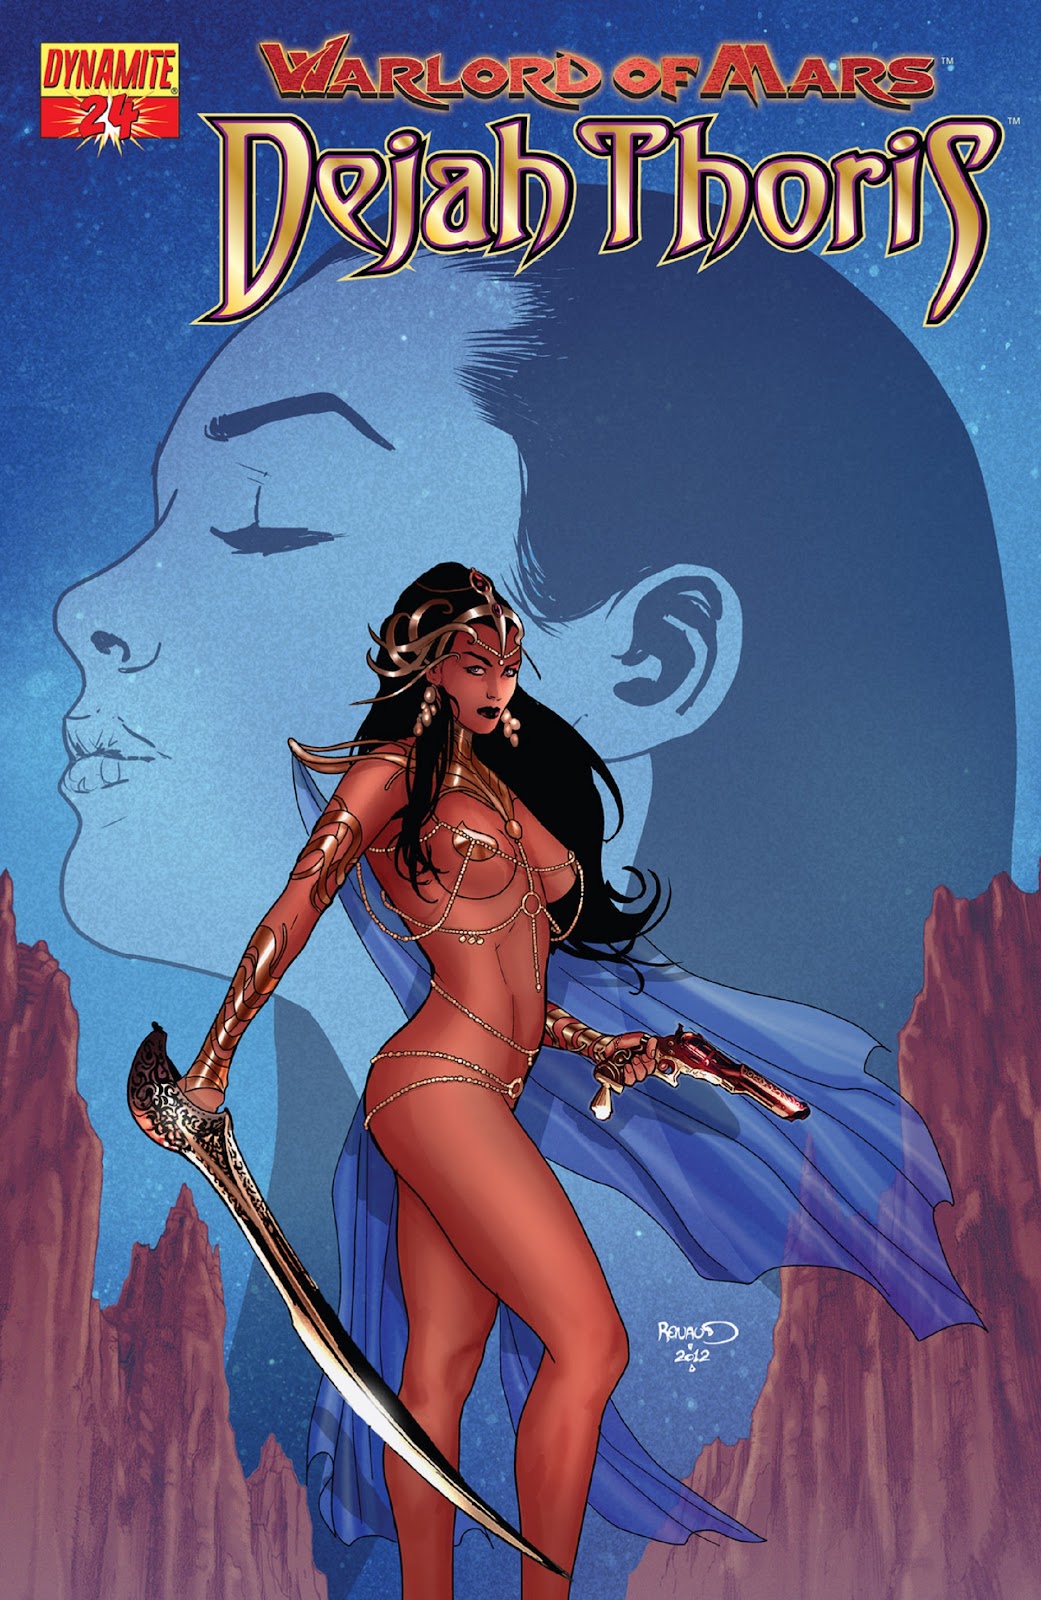 Warlord Of Mars: Dejah Thoris issue 24 - Page 1